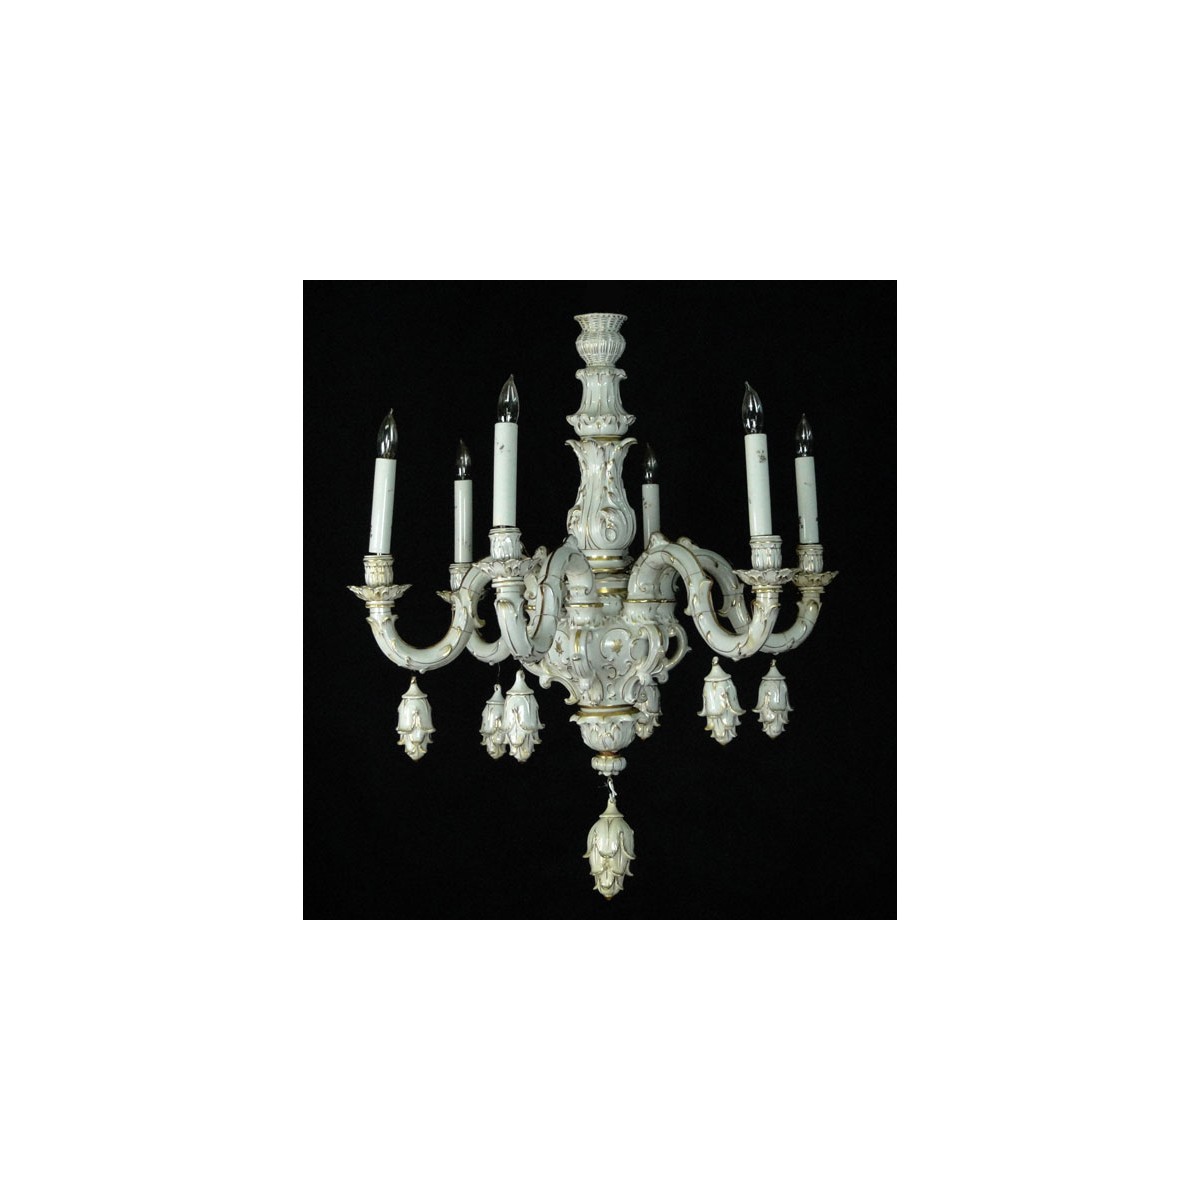 Early 20th Century Continental Gilt Porcelain Six Light Chandelier with Matching Canopy. Unsigned.